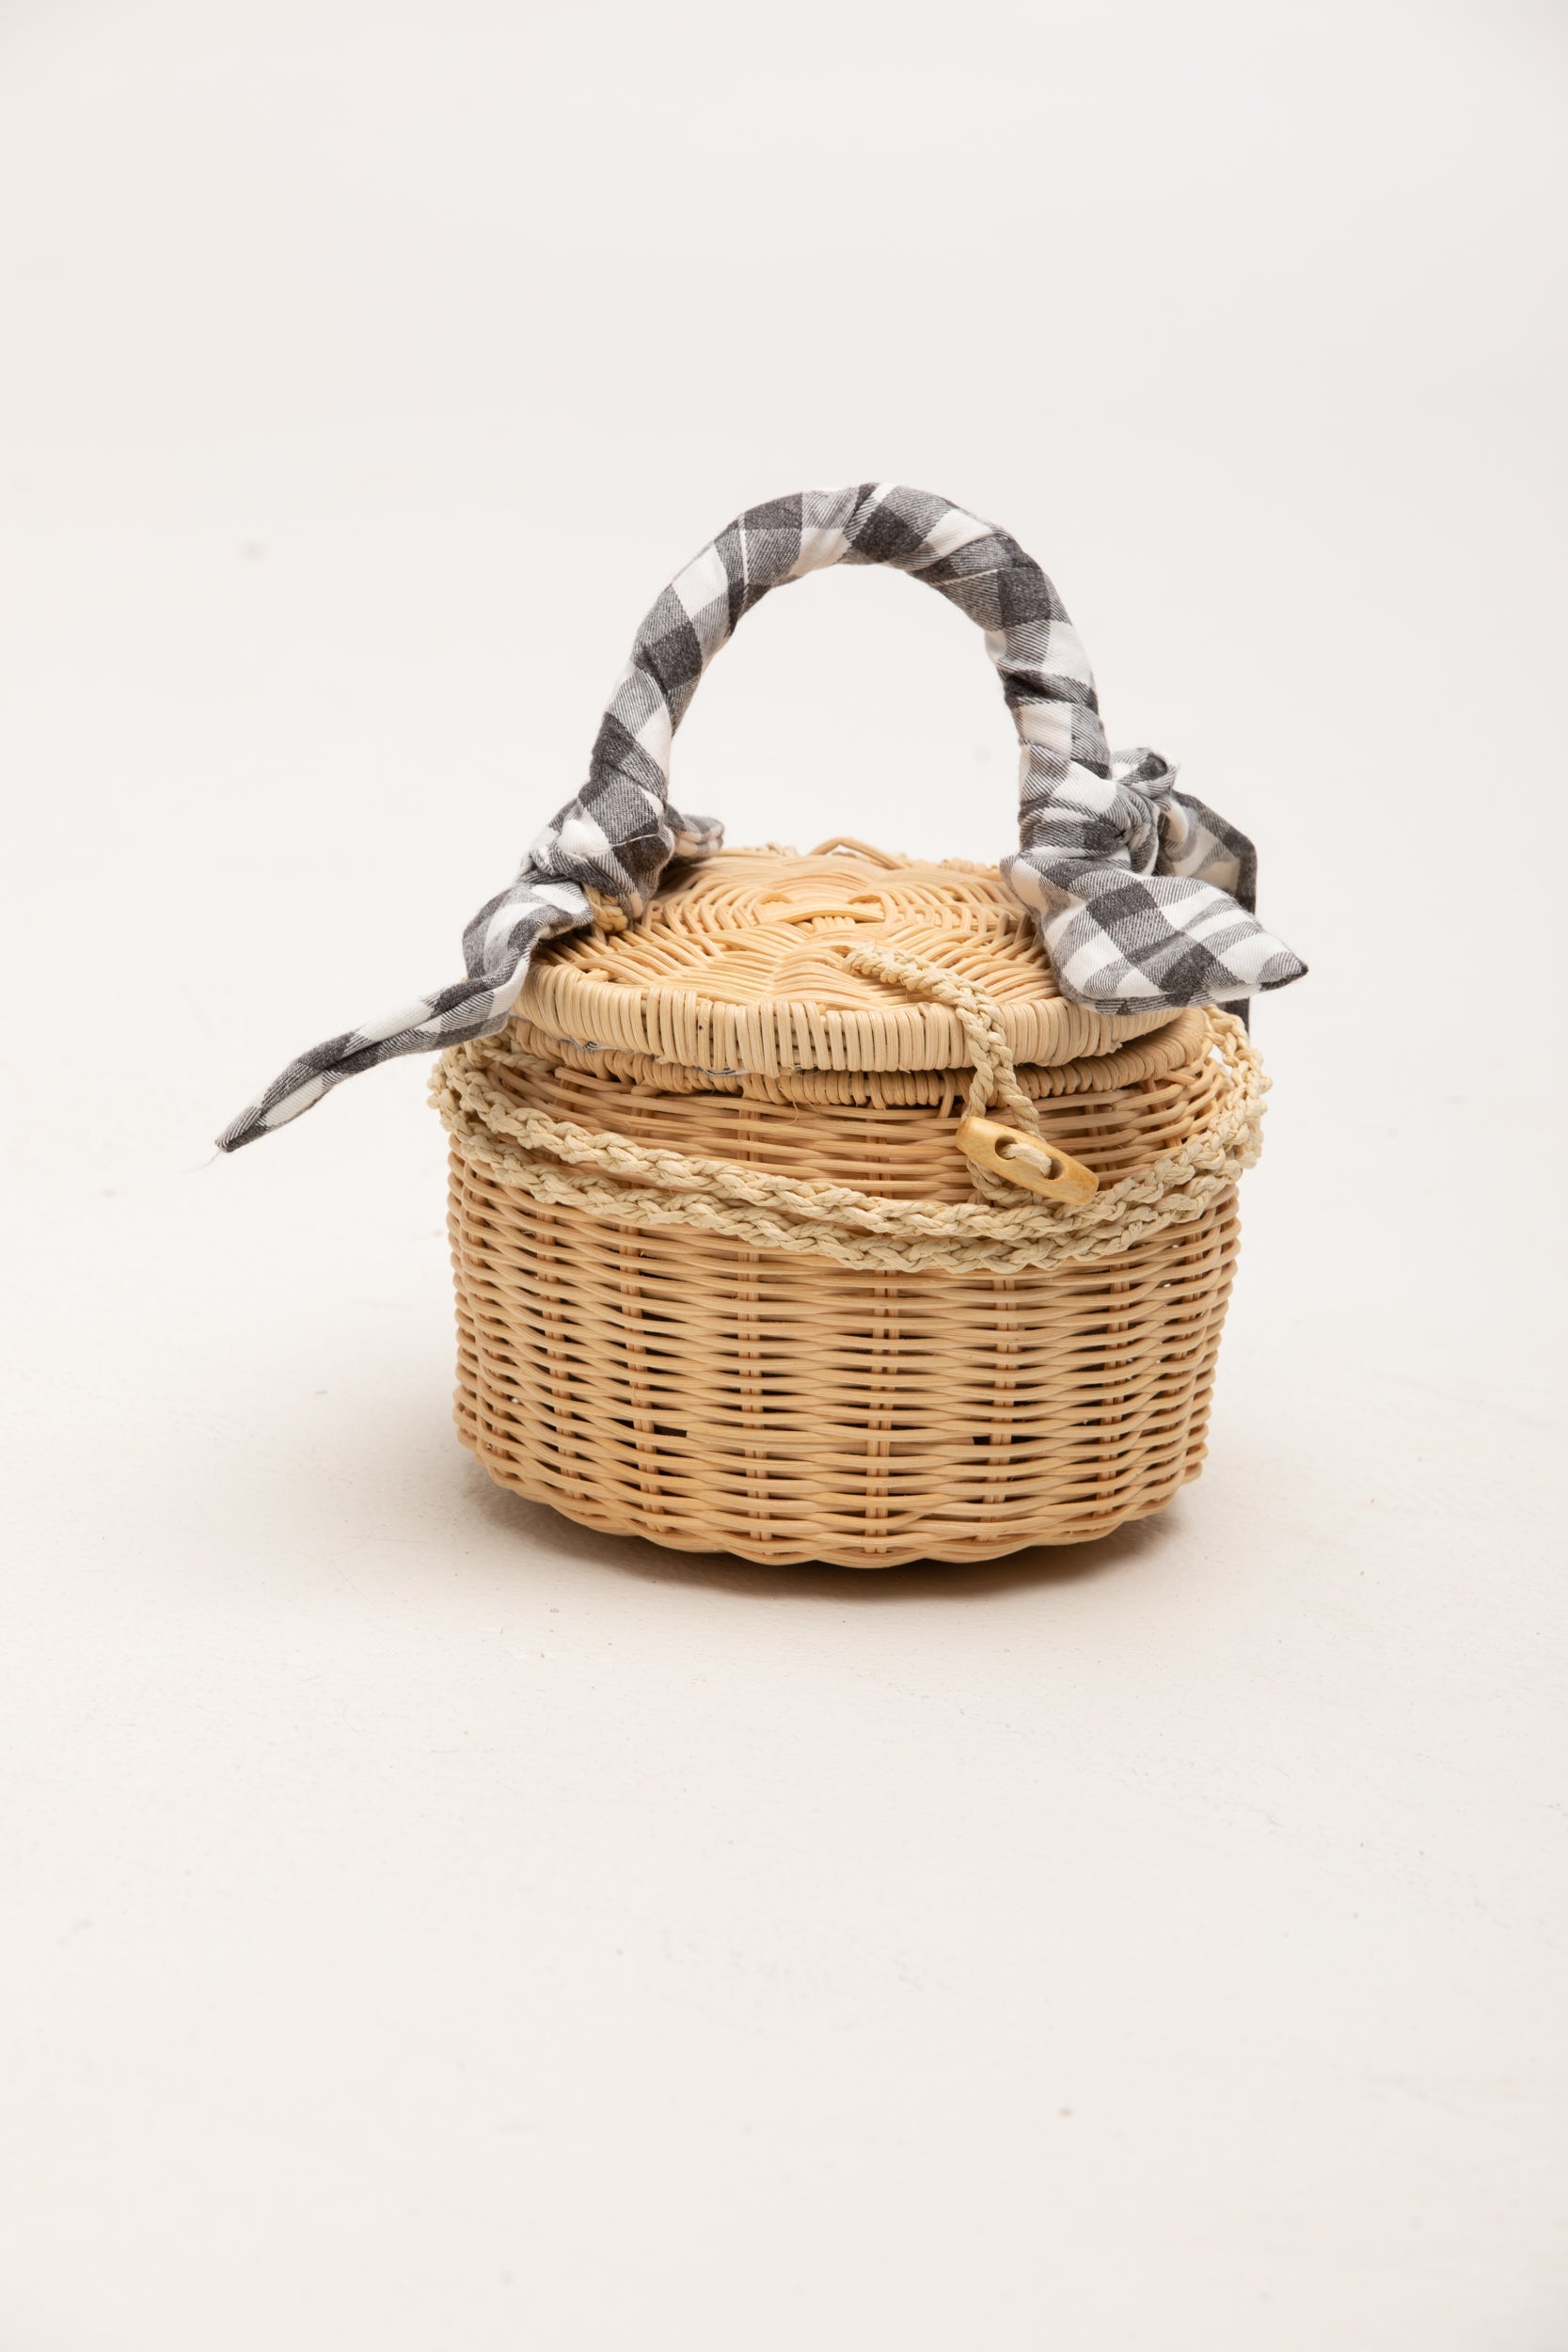 City Lights Collection-Picnic Wicker Hand Bag in Black